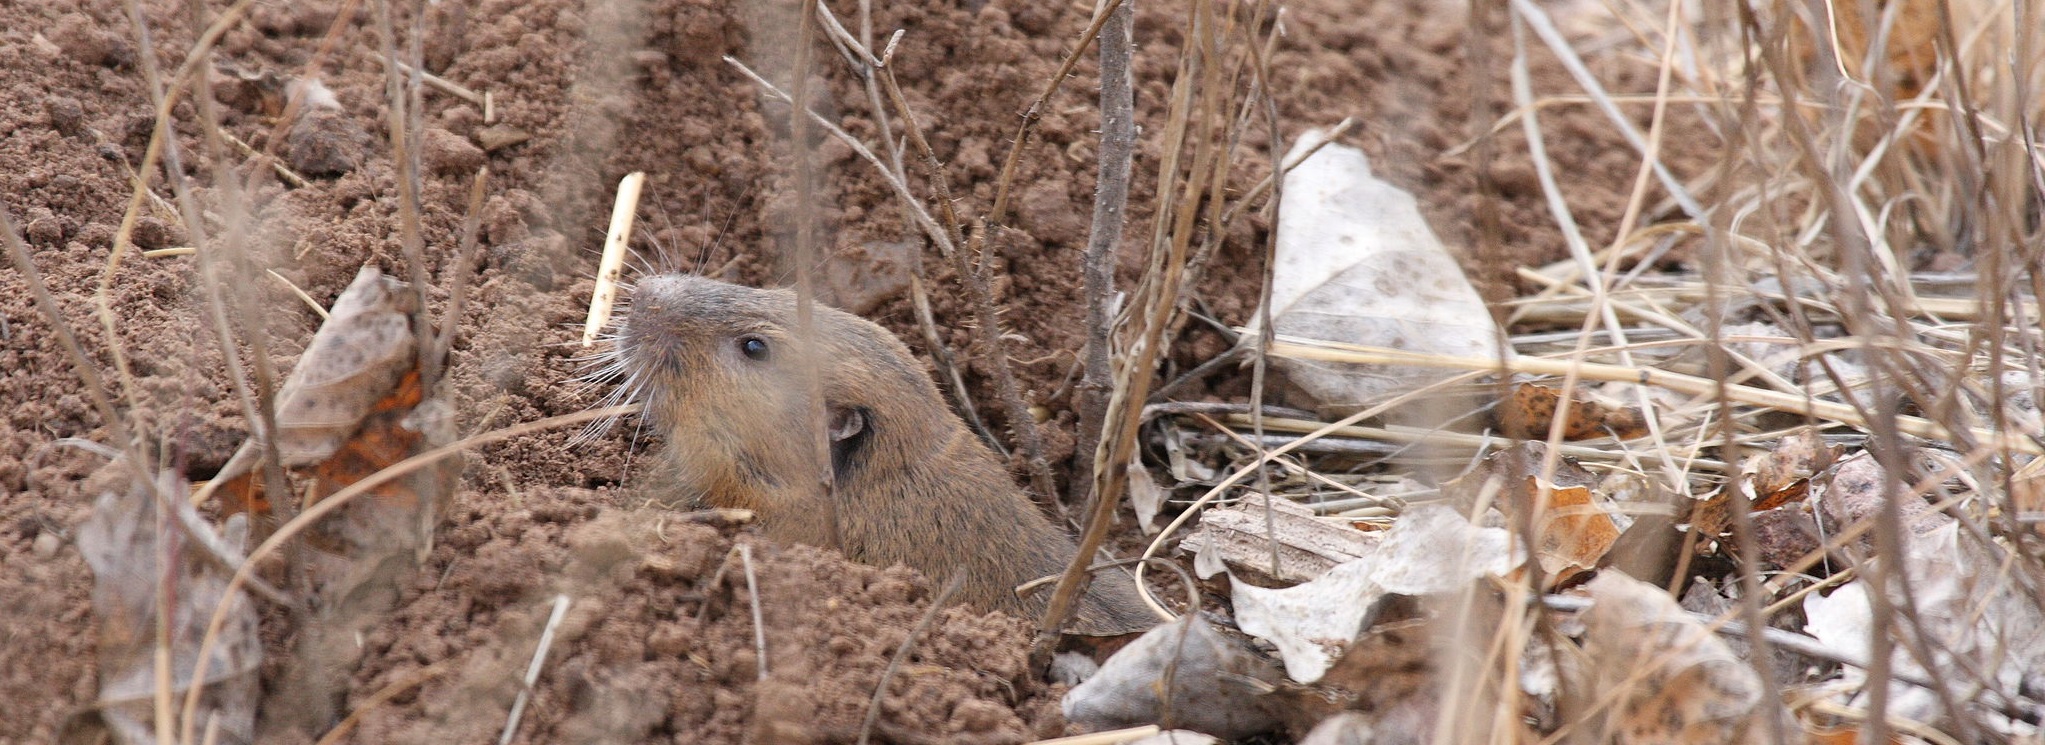 Taken from http://commons.wikimedia.org/wiki/File%3ABotta's_pocket_gopher.jpg. Photo of a pocket gopher leaving its burrow.